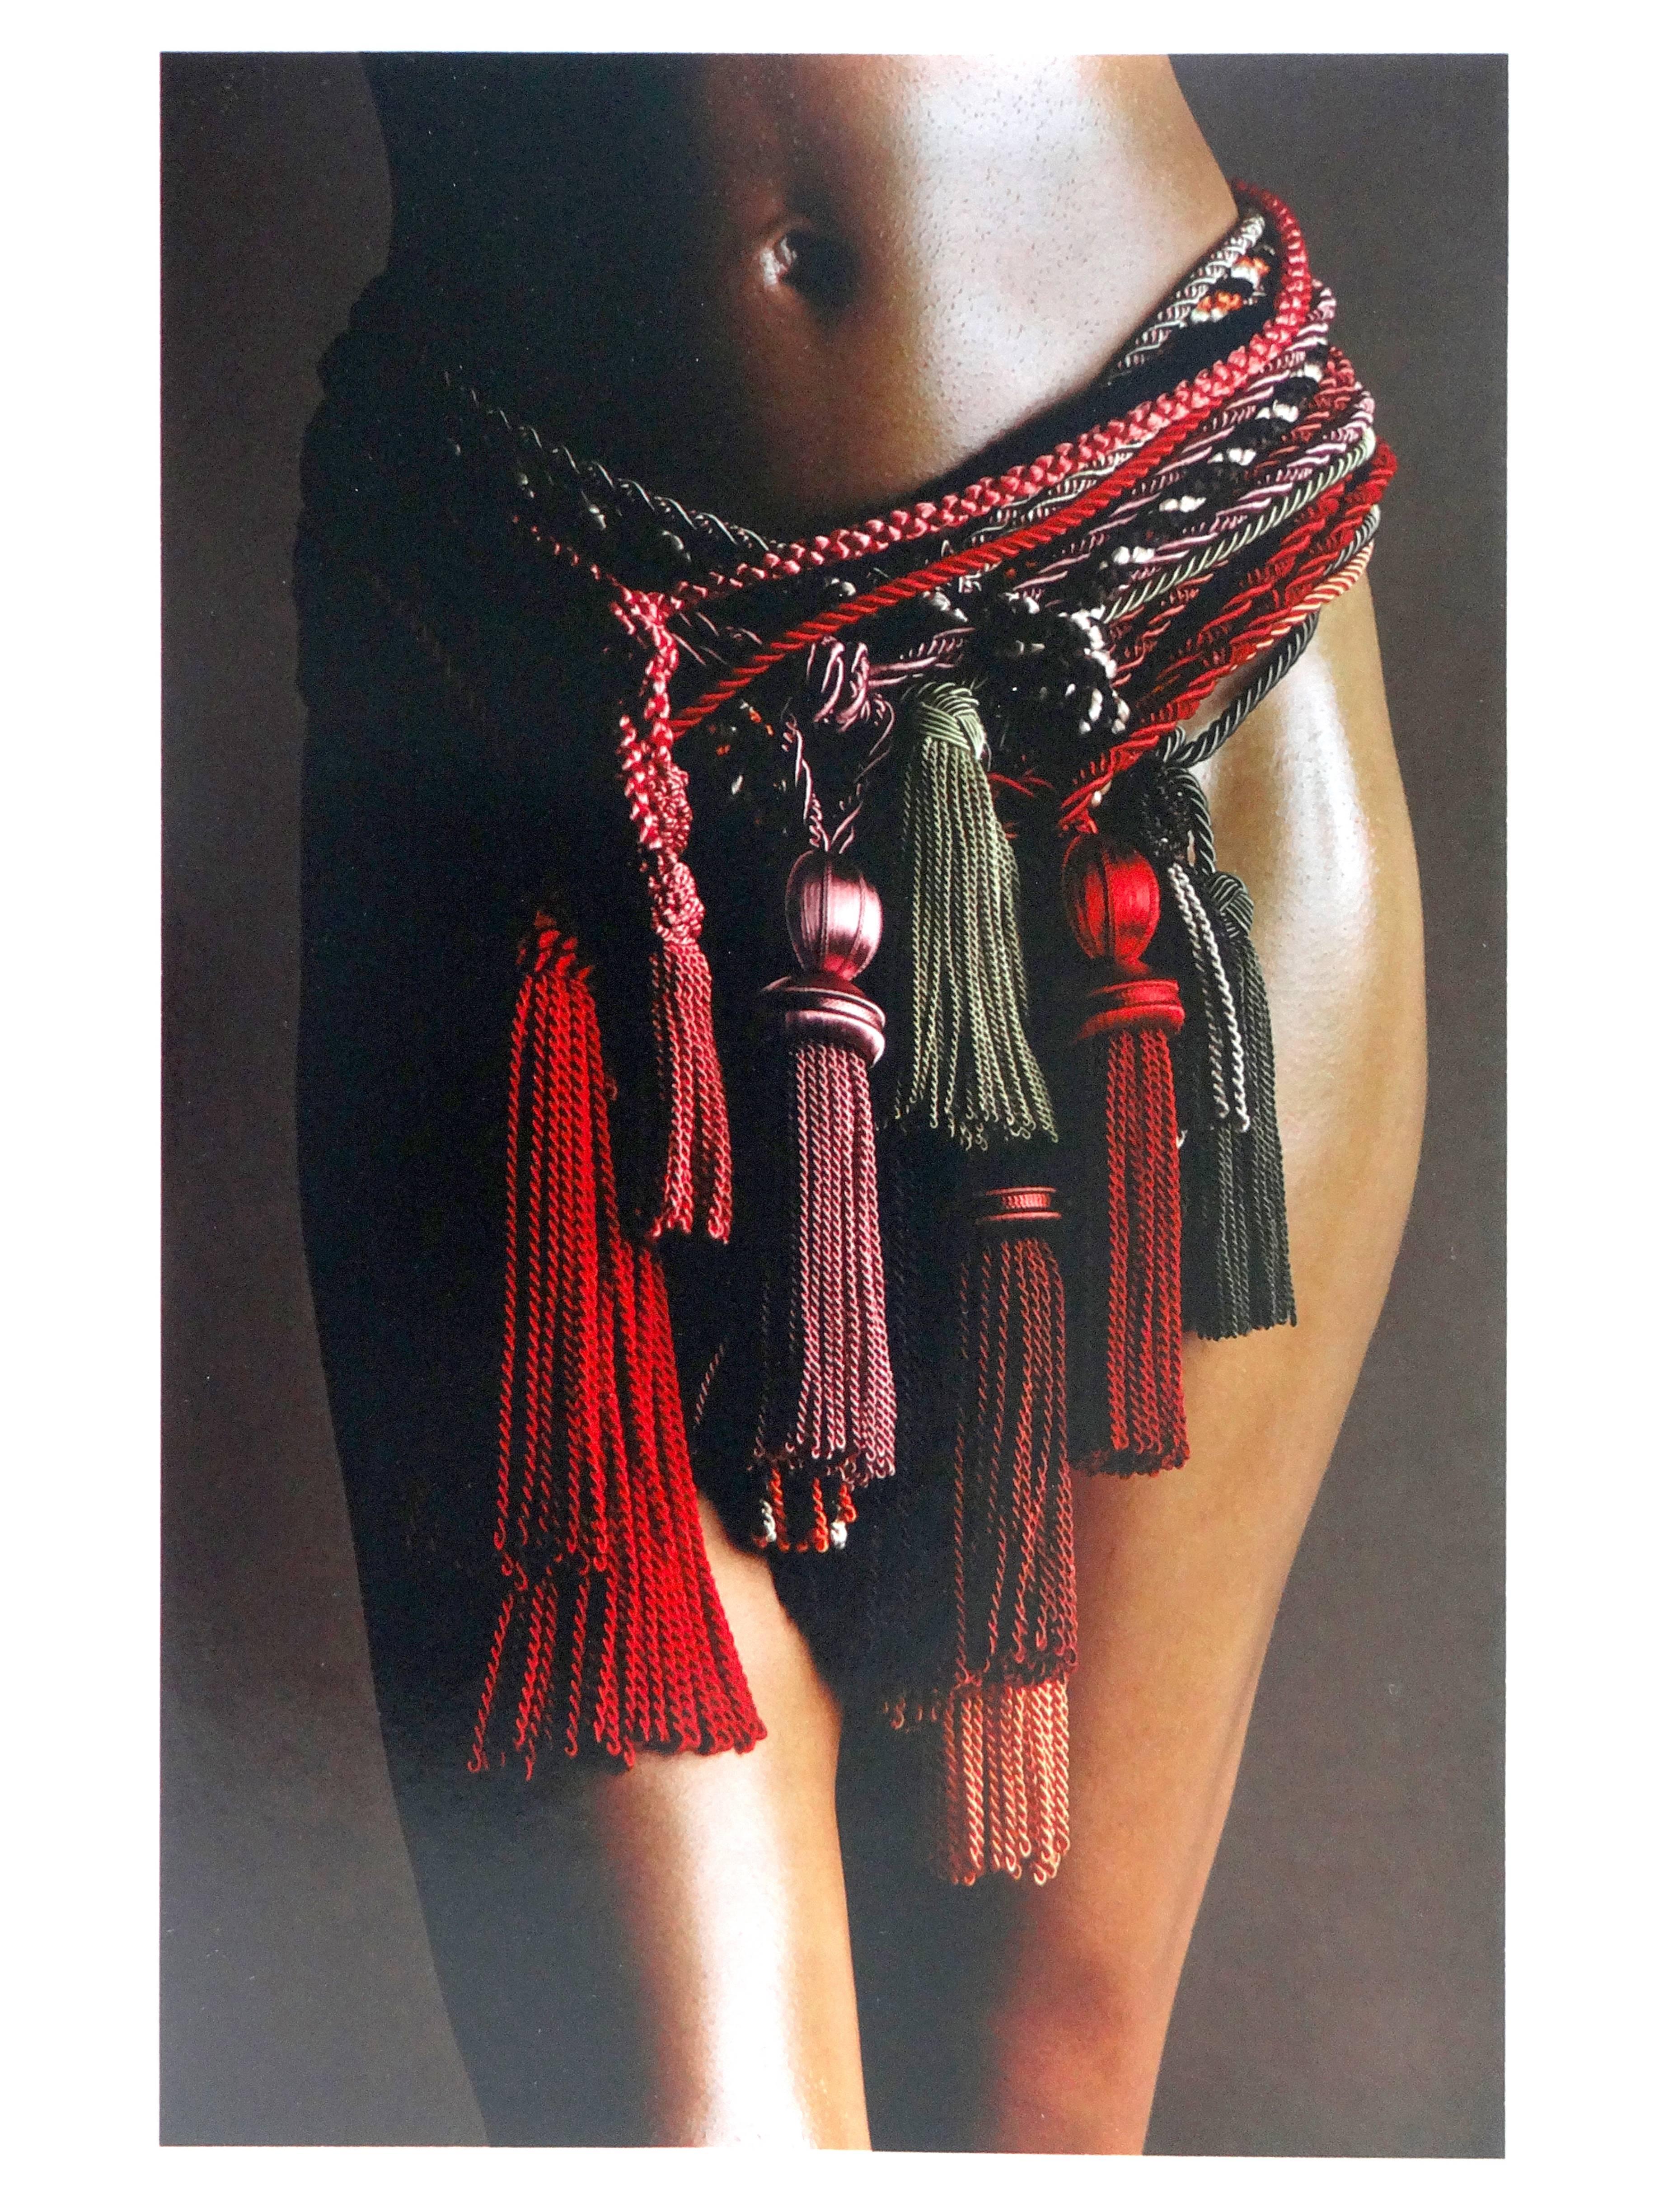 Hans Feurer Color Photograph - Hips with Tassels, Stamped, Signed, Titled and Dated in Pencil on Verso